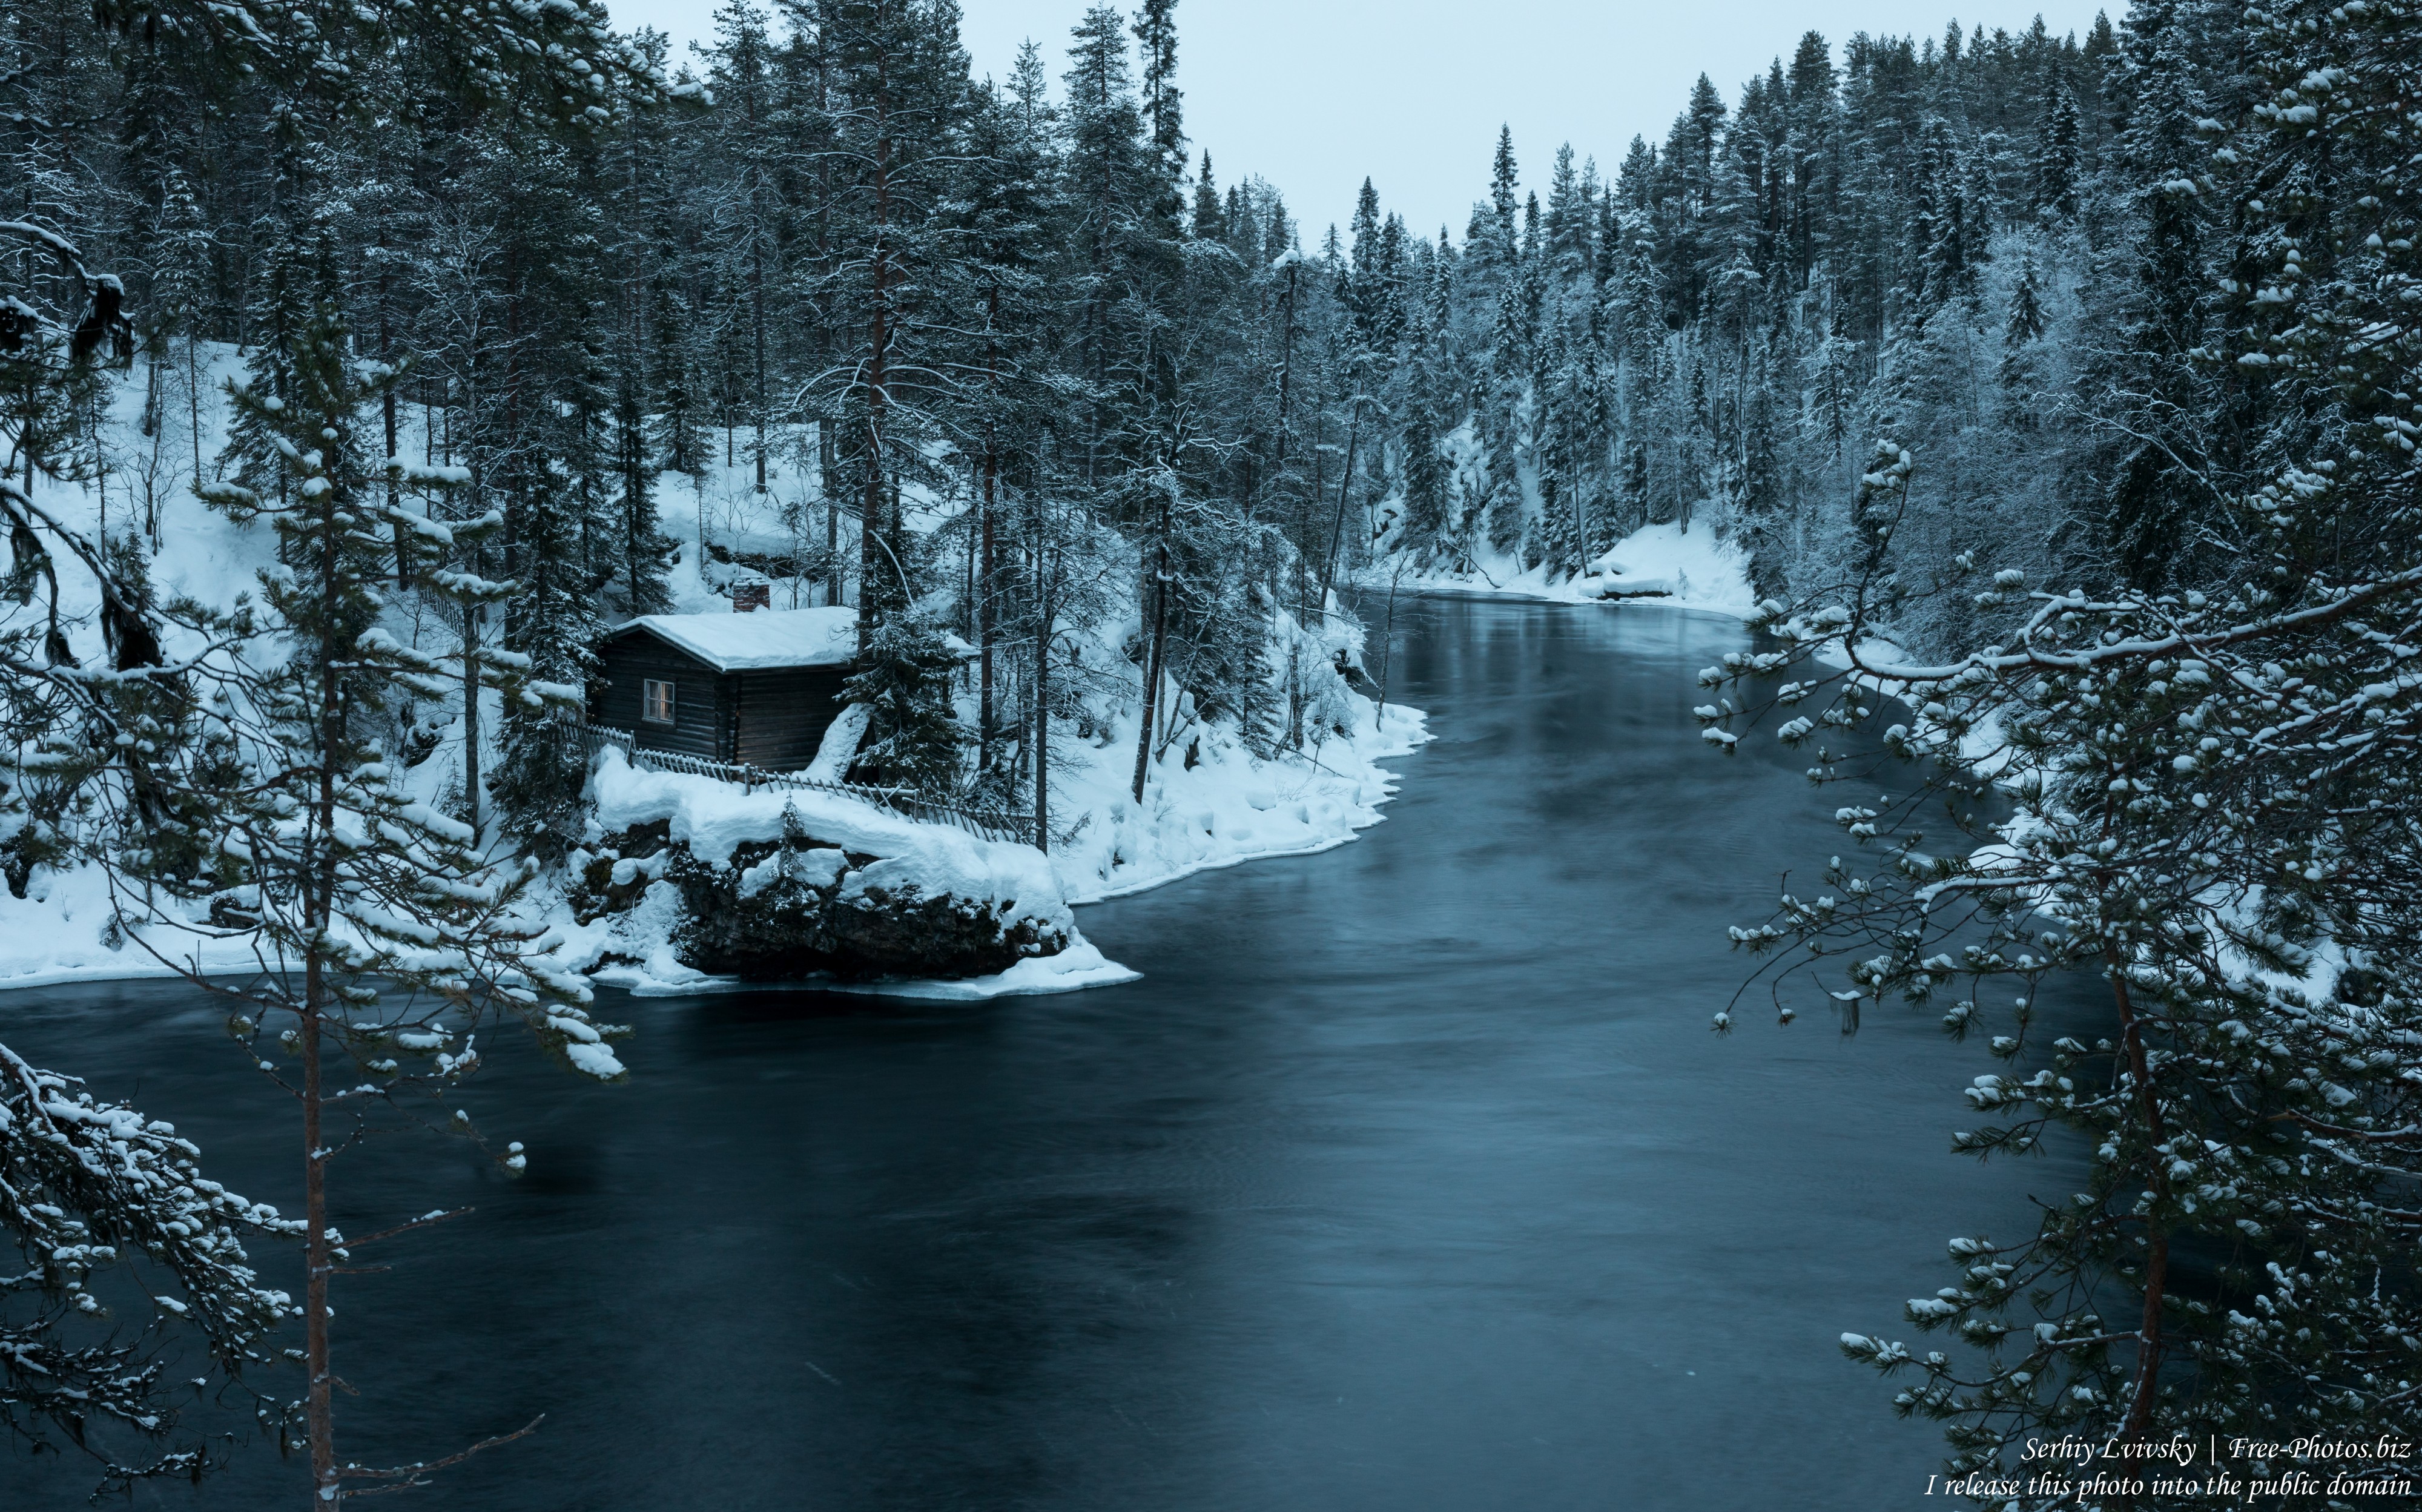 Oulanka, Finland, photographed in January 2020 by Serhiy Lvivsky, picture 4